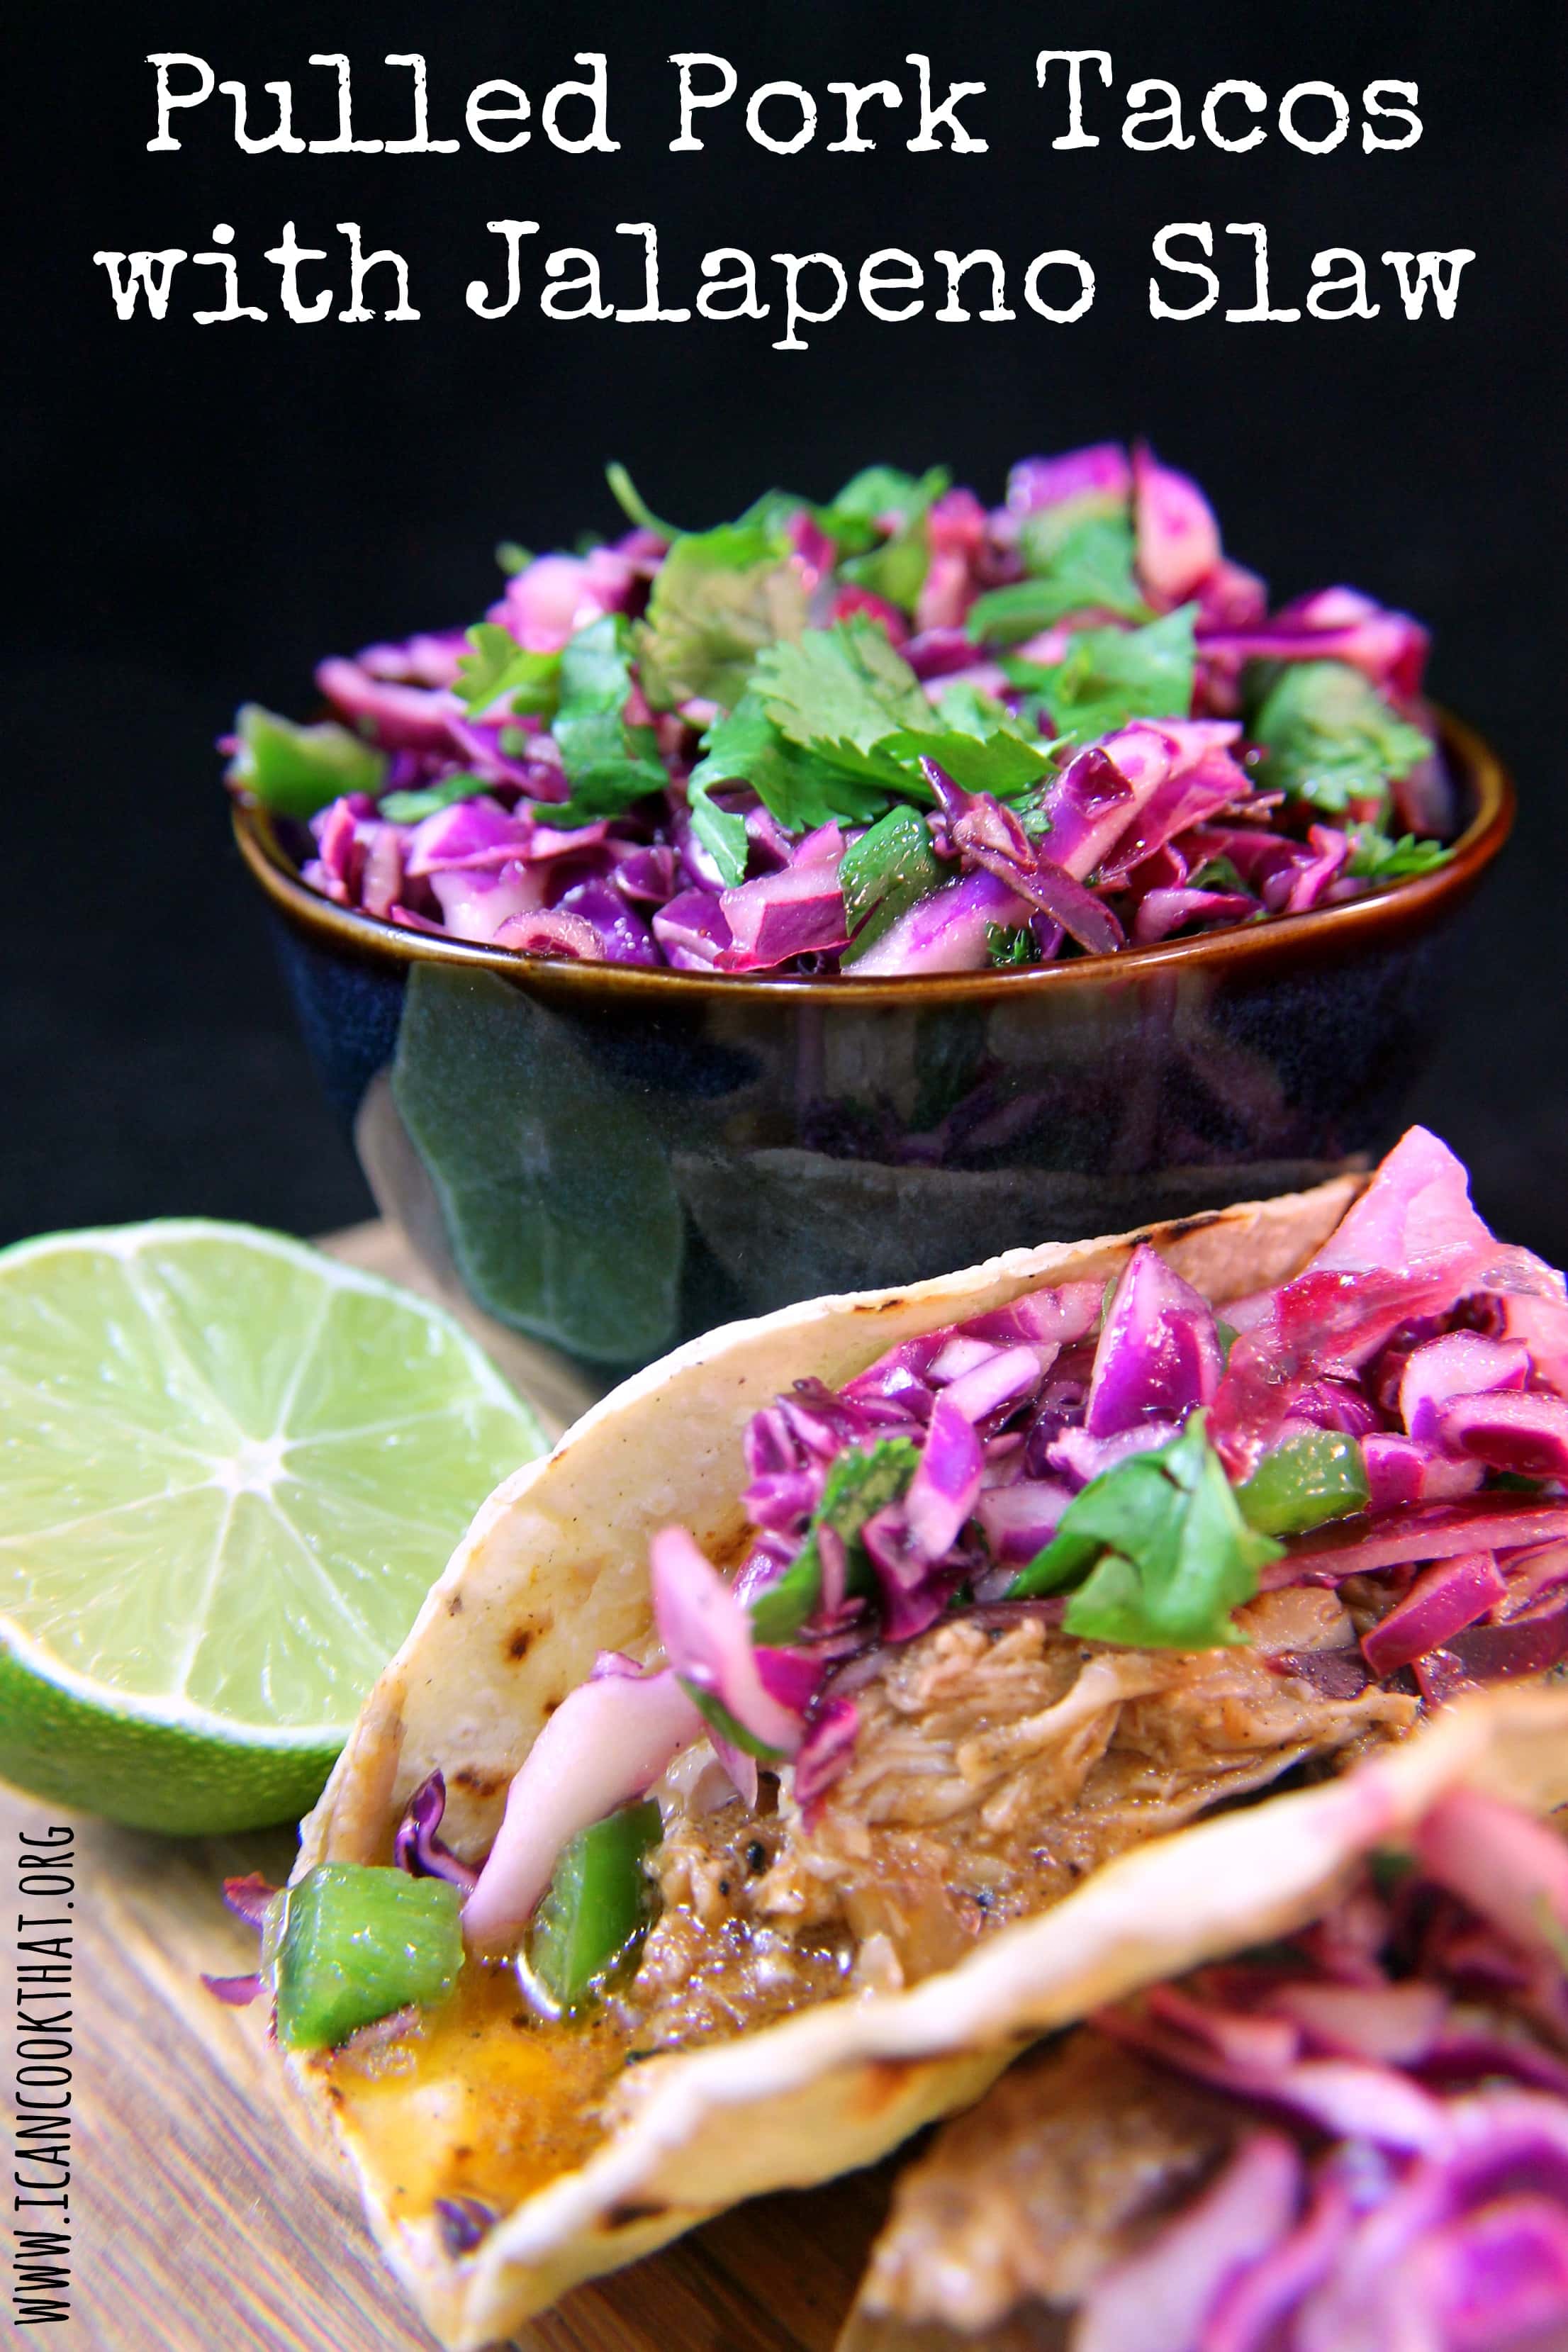 Pulled Pork Tacos with Jalapeno Slaw